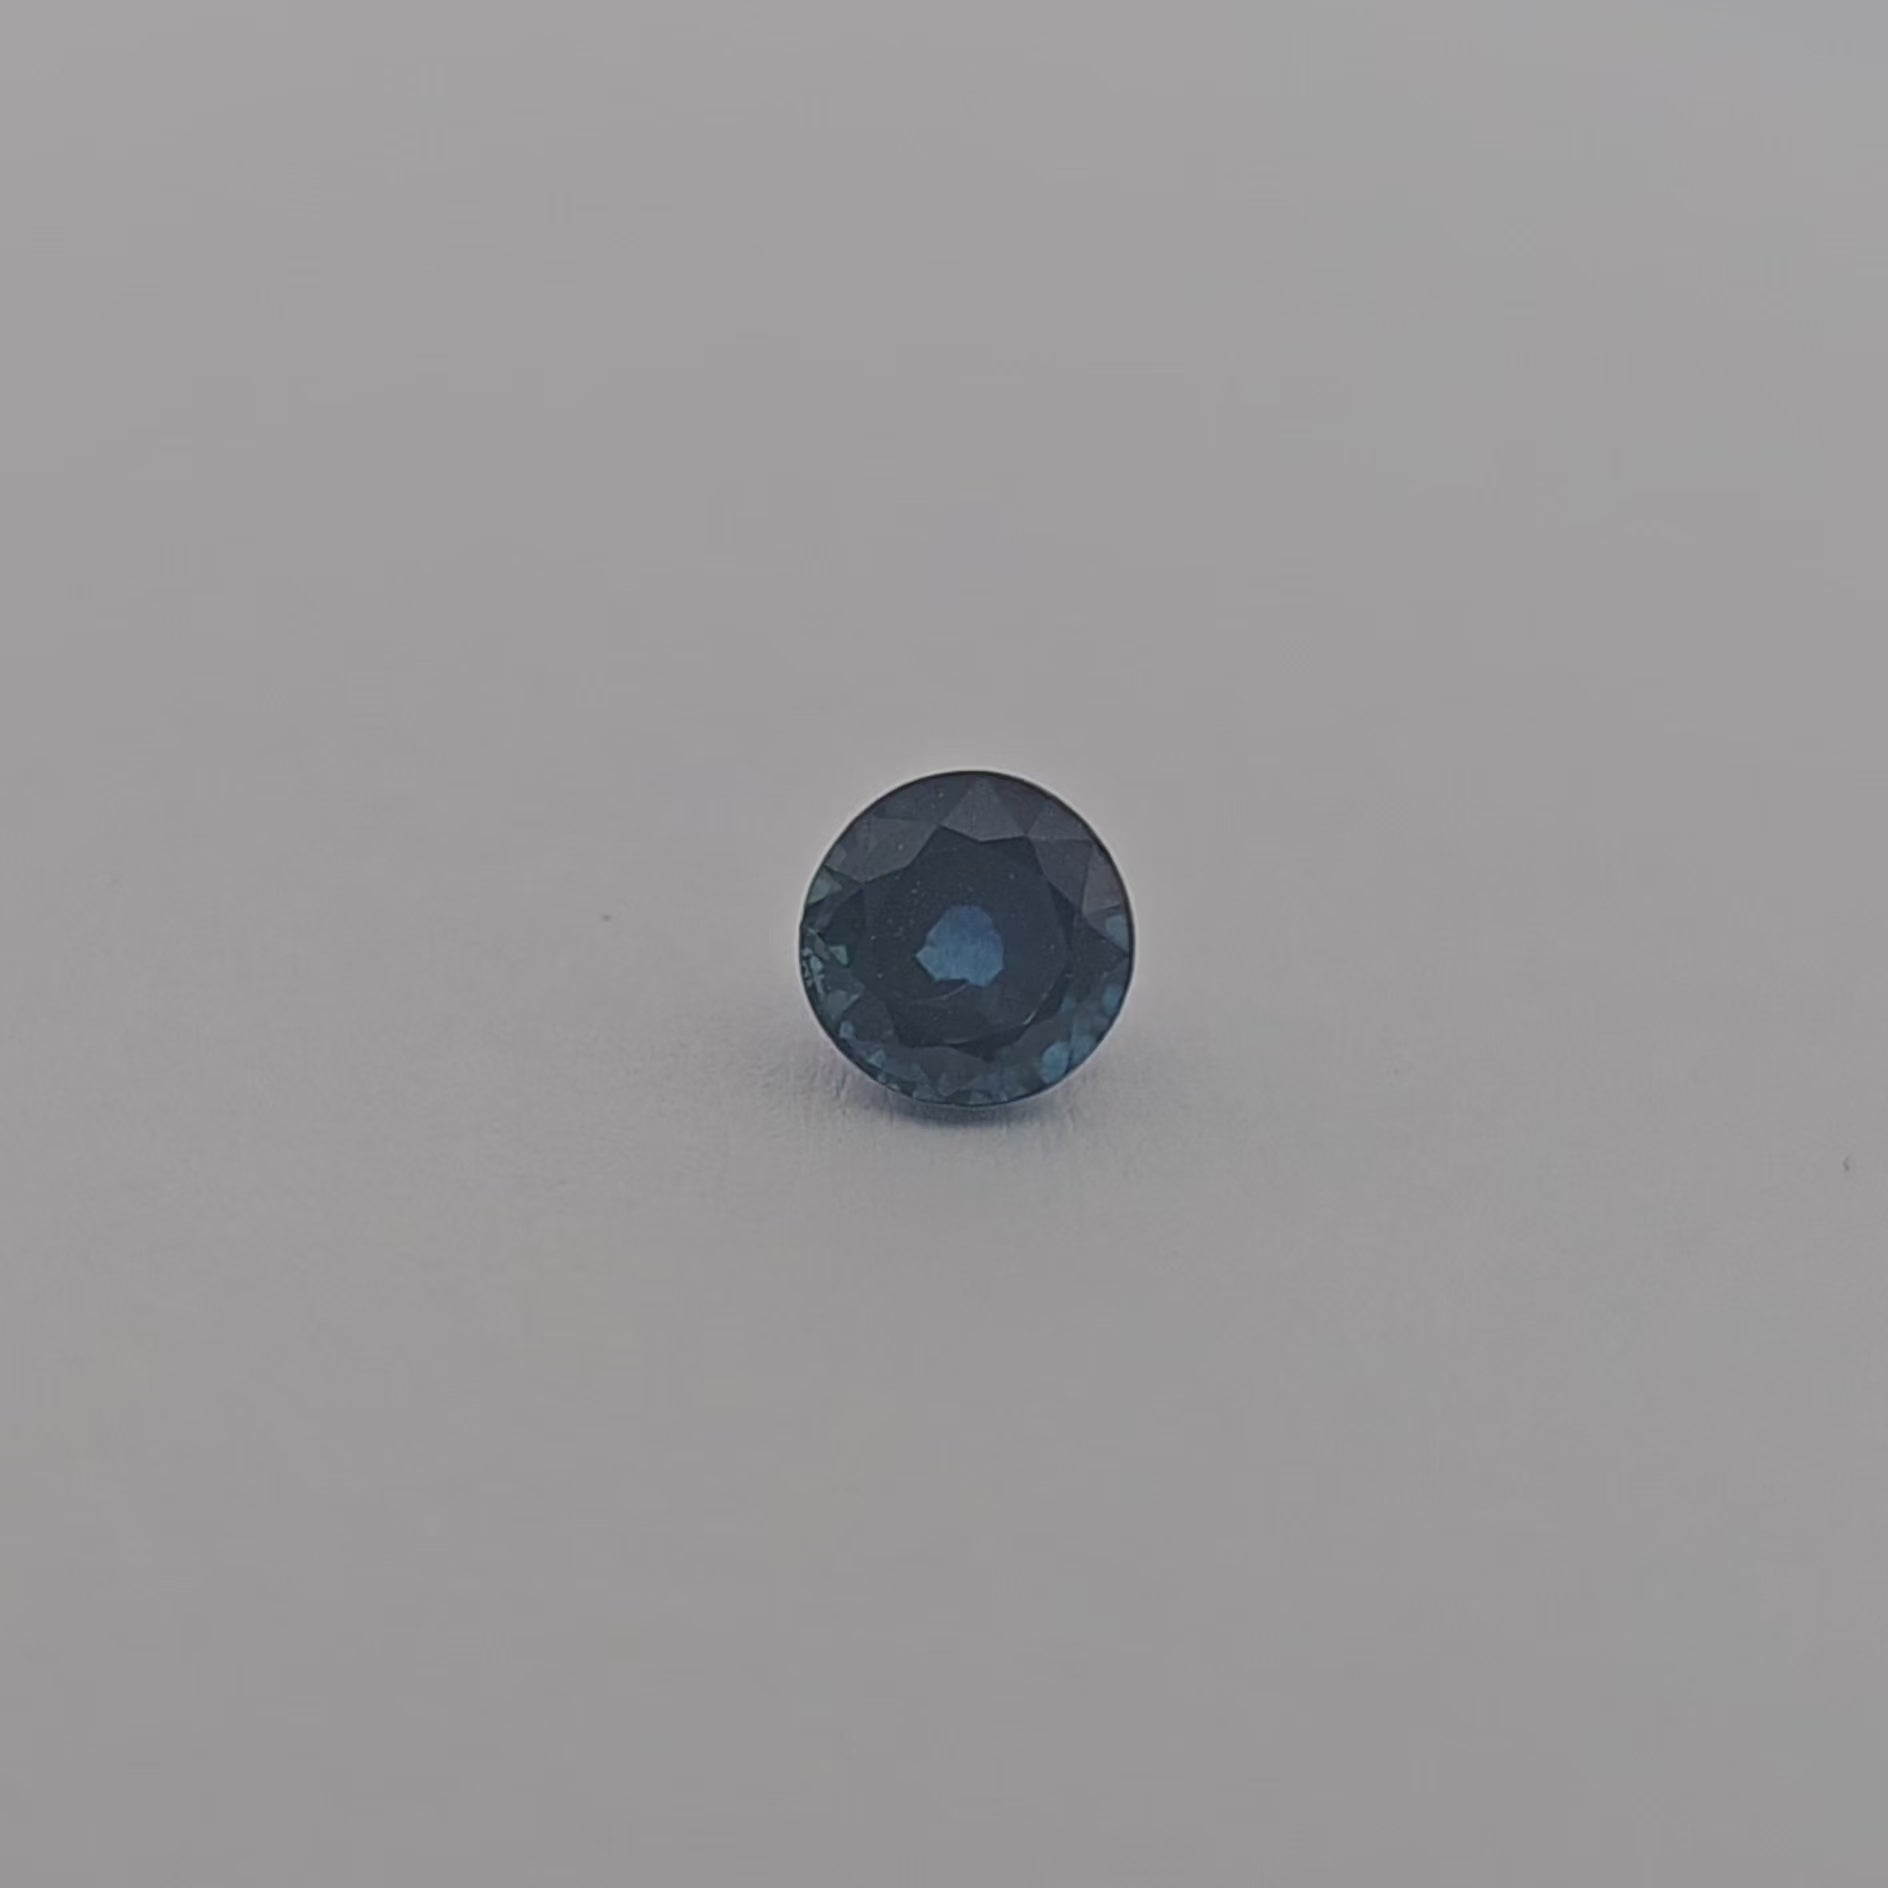 Natural Blue Sapphire Stone 1.03 Carats Round Shape 5.3 mm